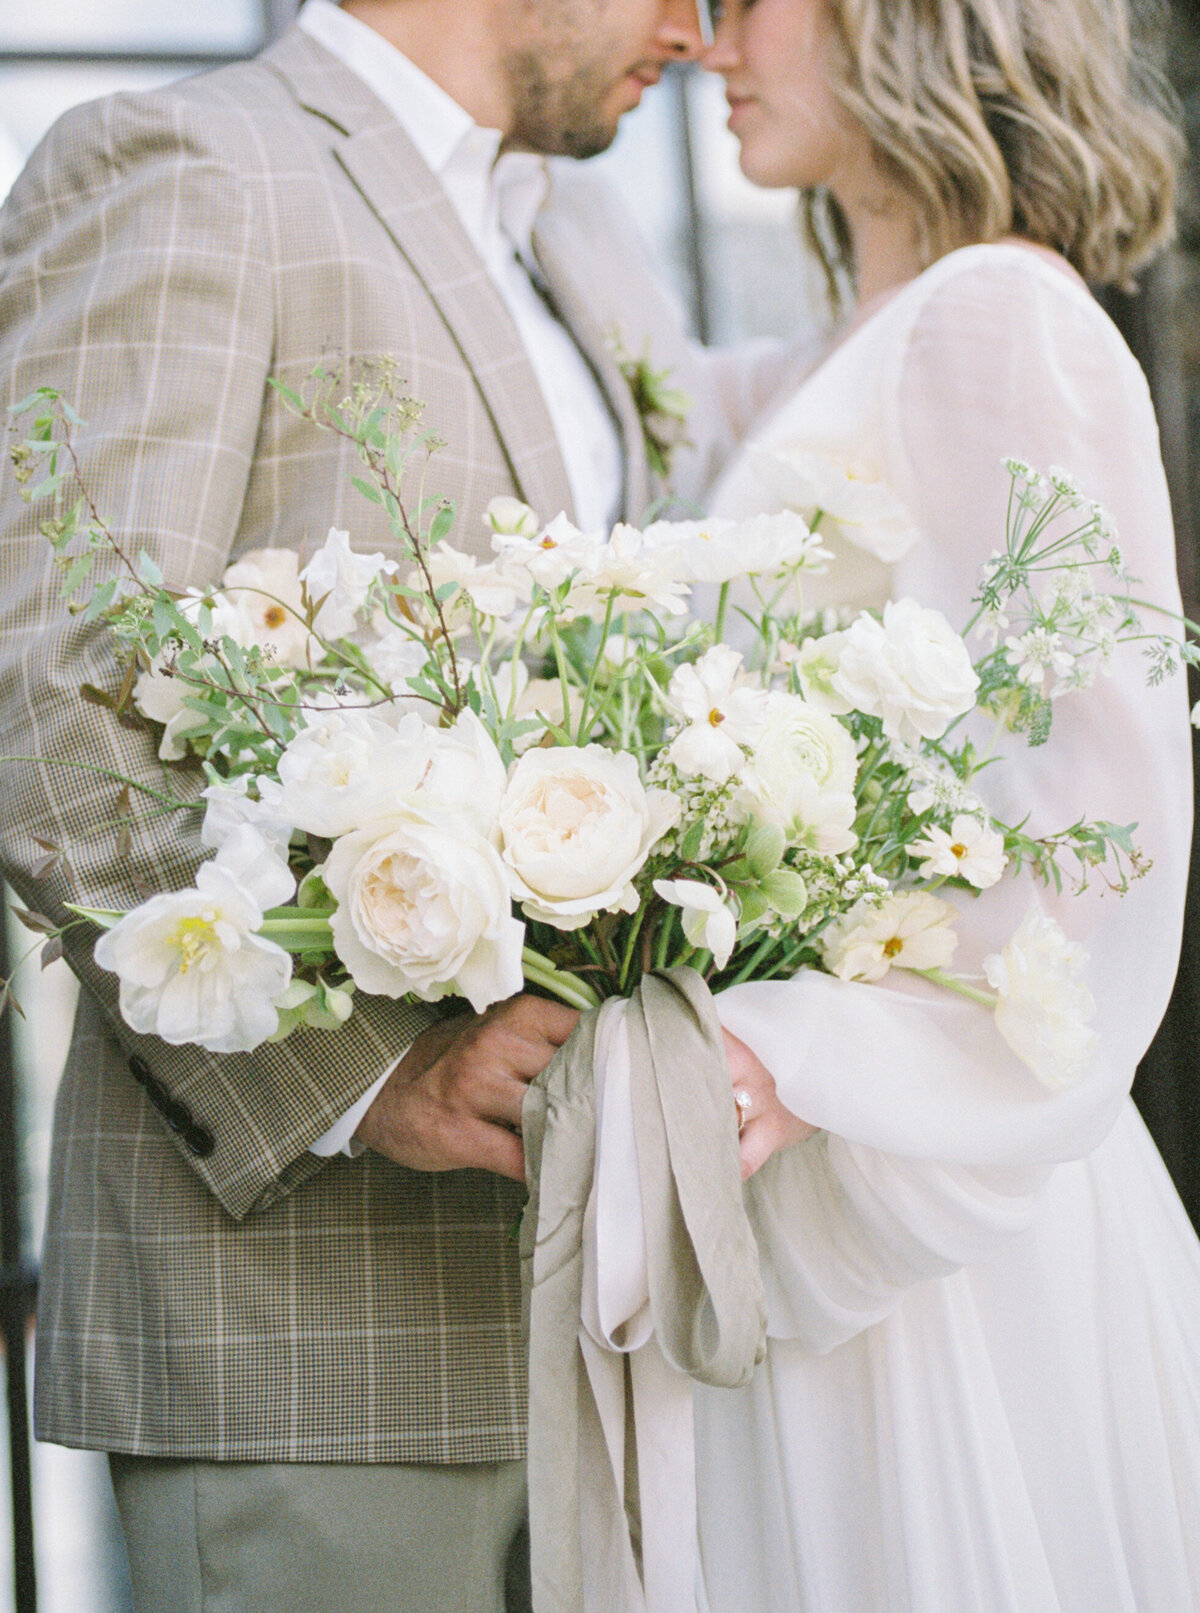 A bride and groom face to face as they hold the bouquet in the middle .